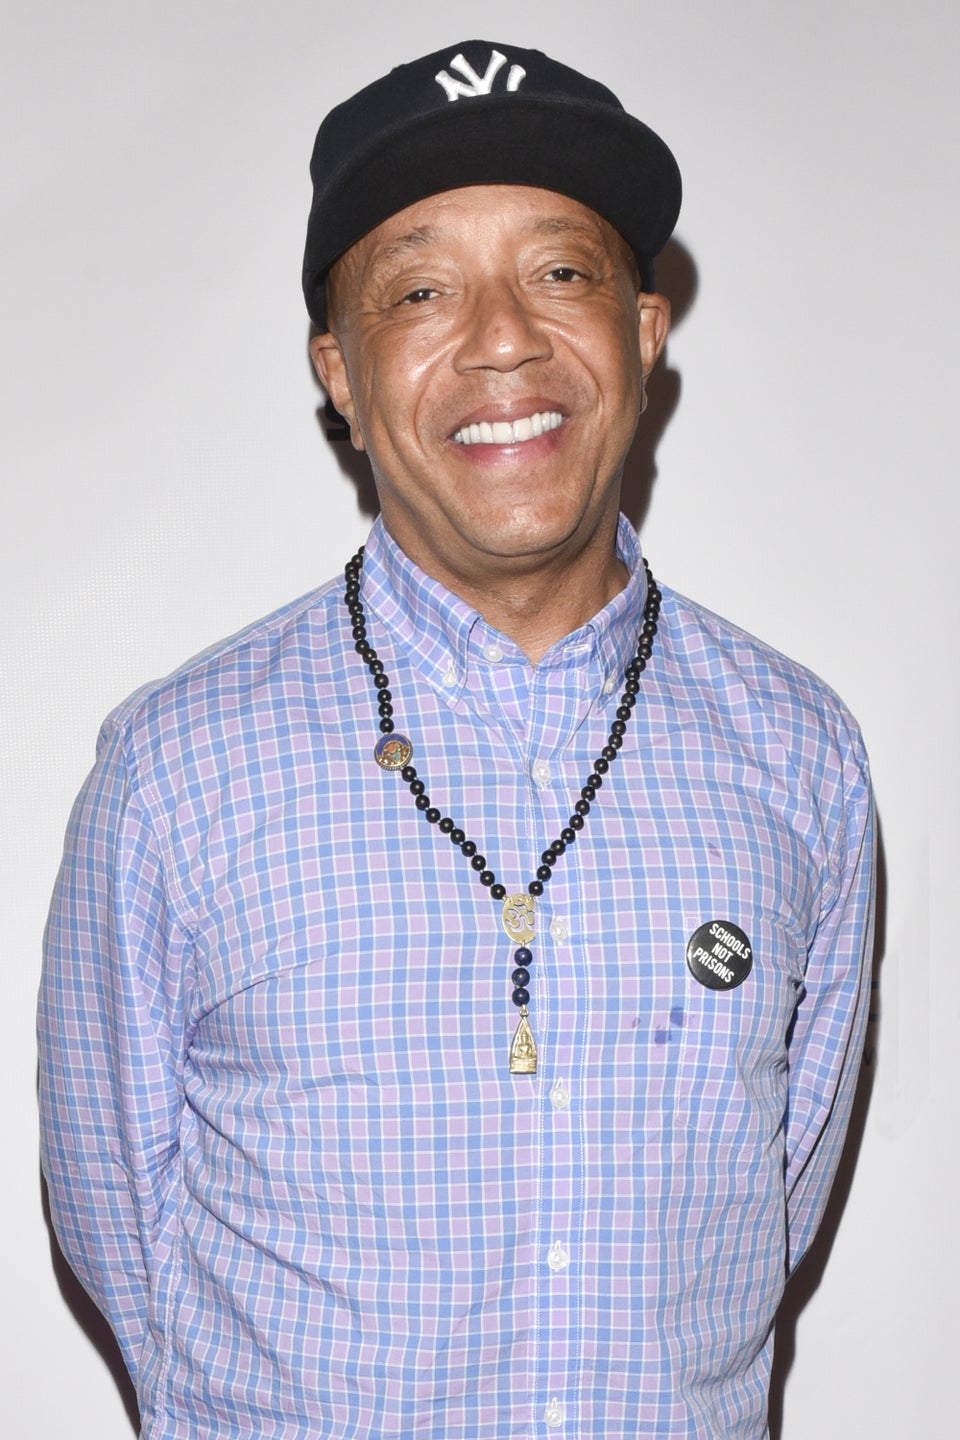 Russell Simmons Pens Warning Letter To Trump: ‘You Will Go Down In History As The Great Divider’